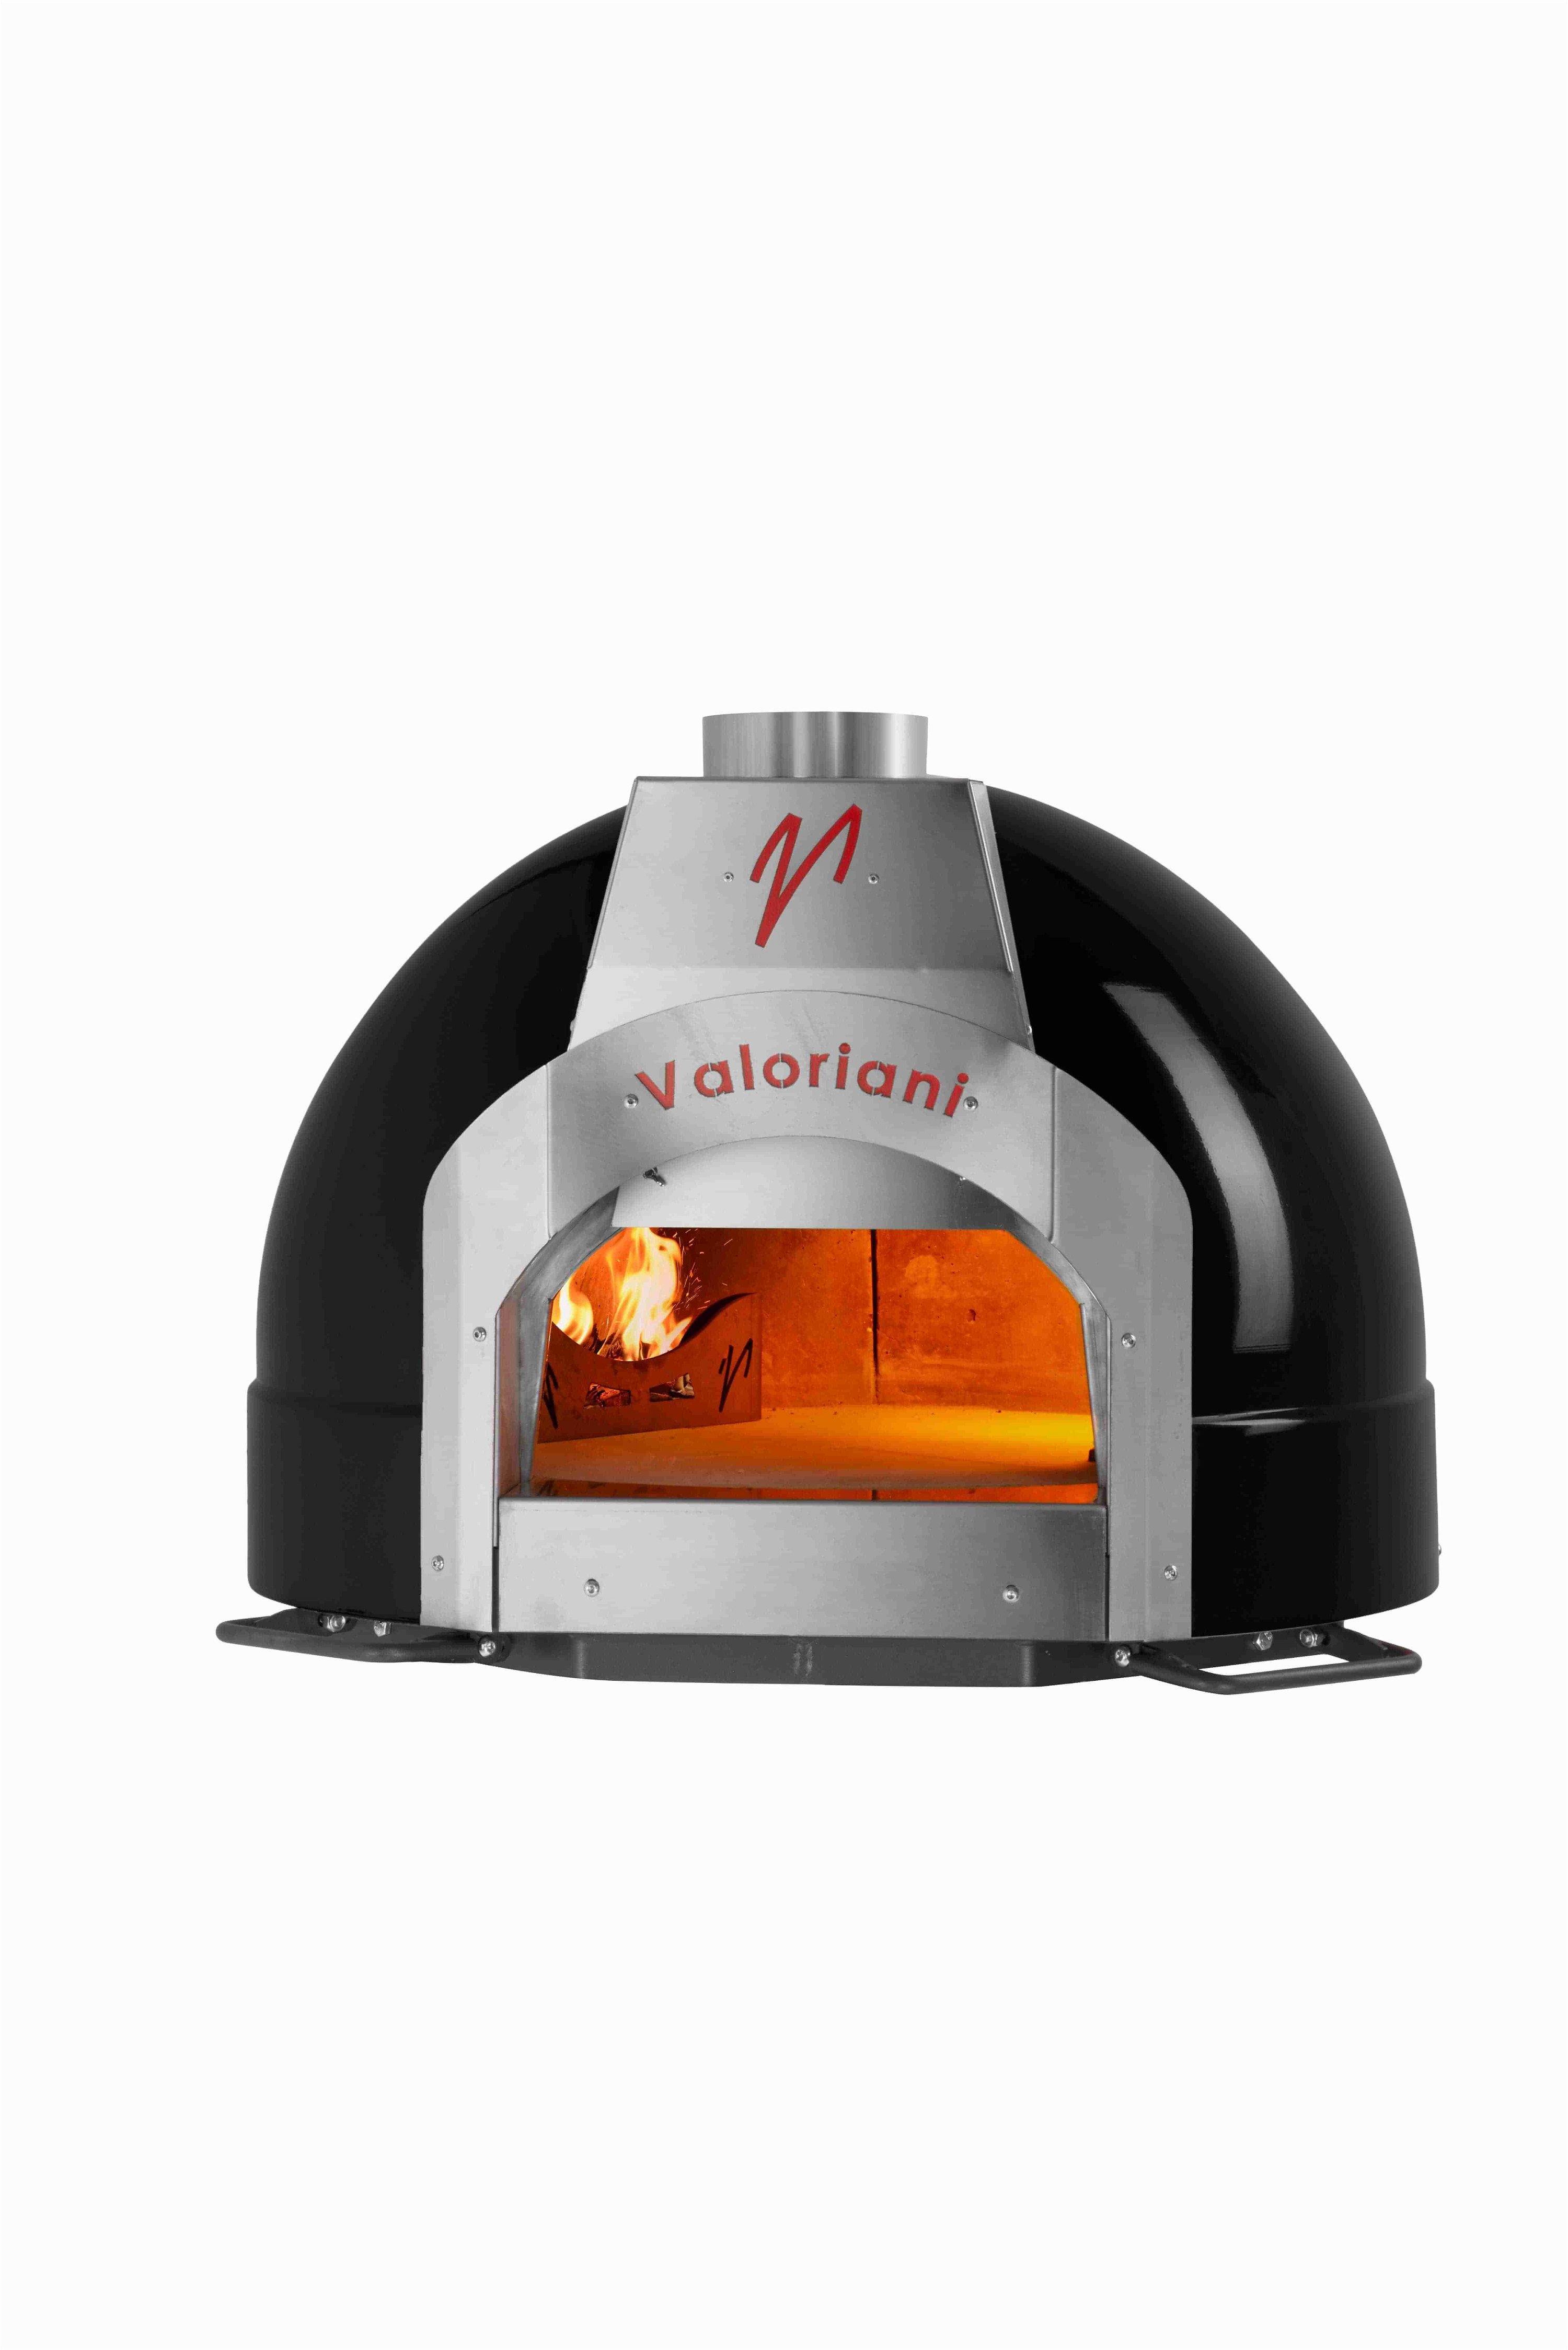 Valoriani Baby: pizza oven with wood firing and 60cm diameter, tabletop